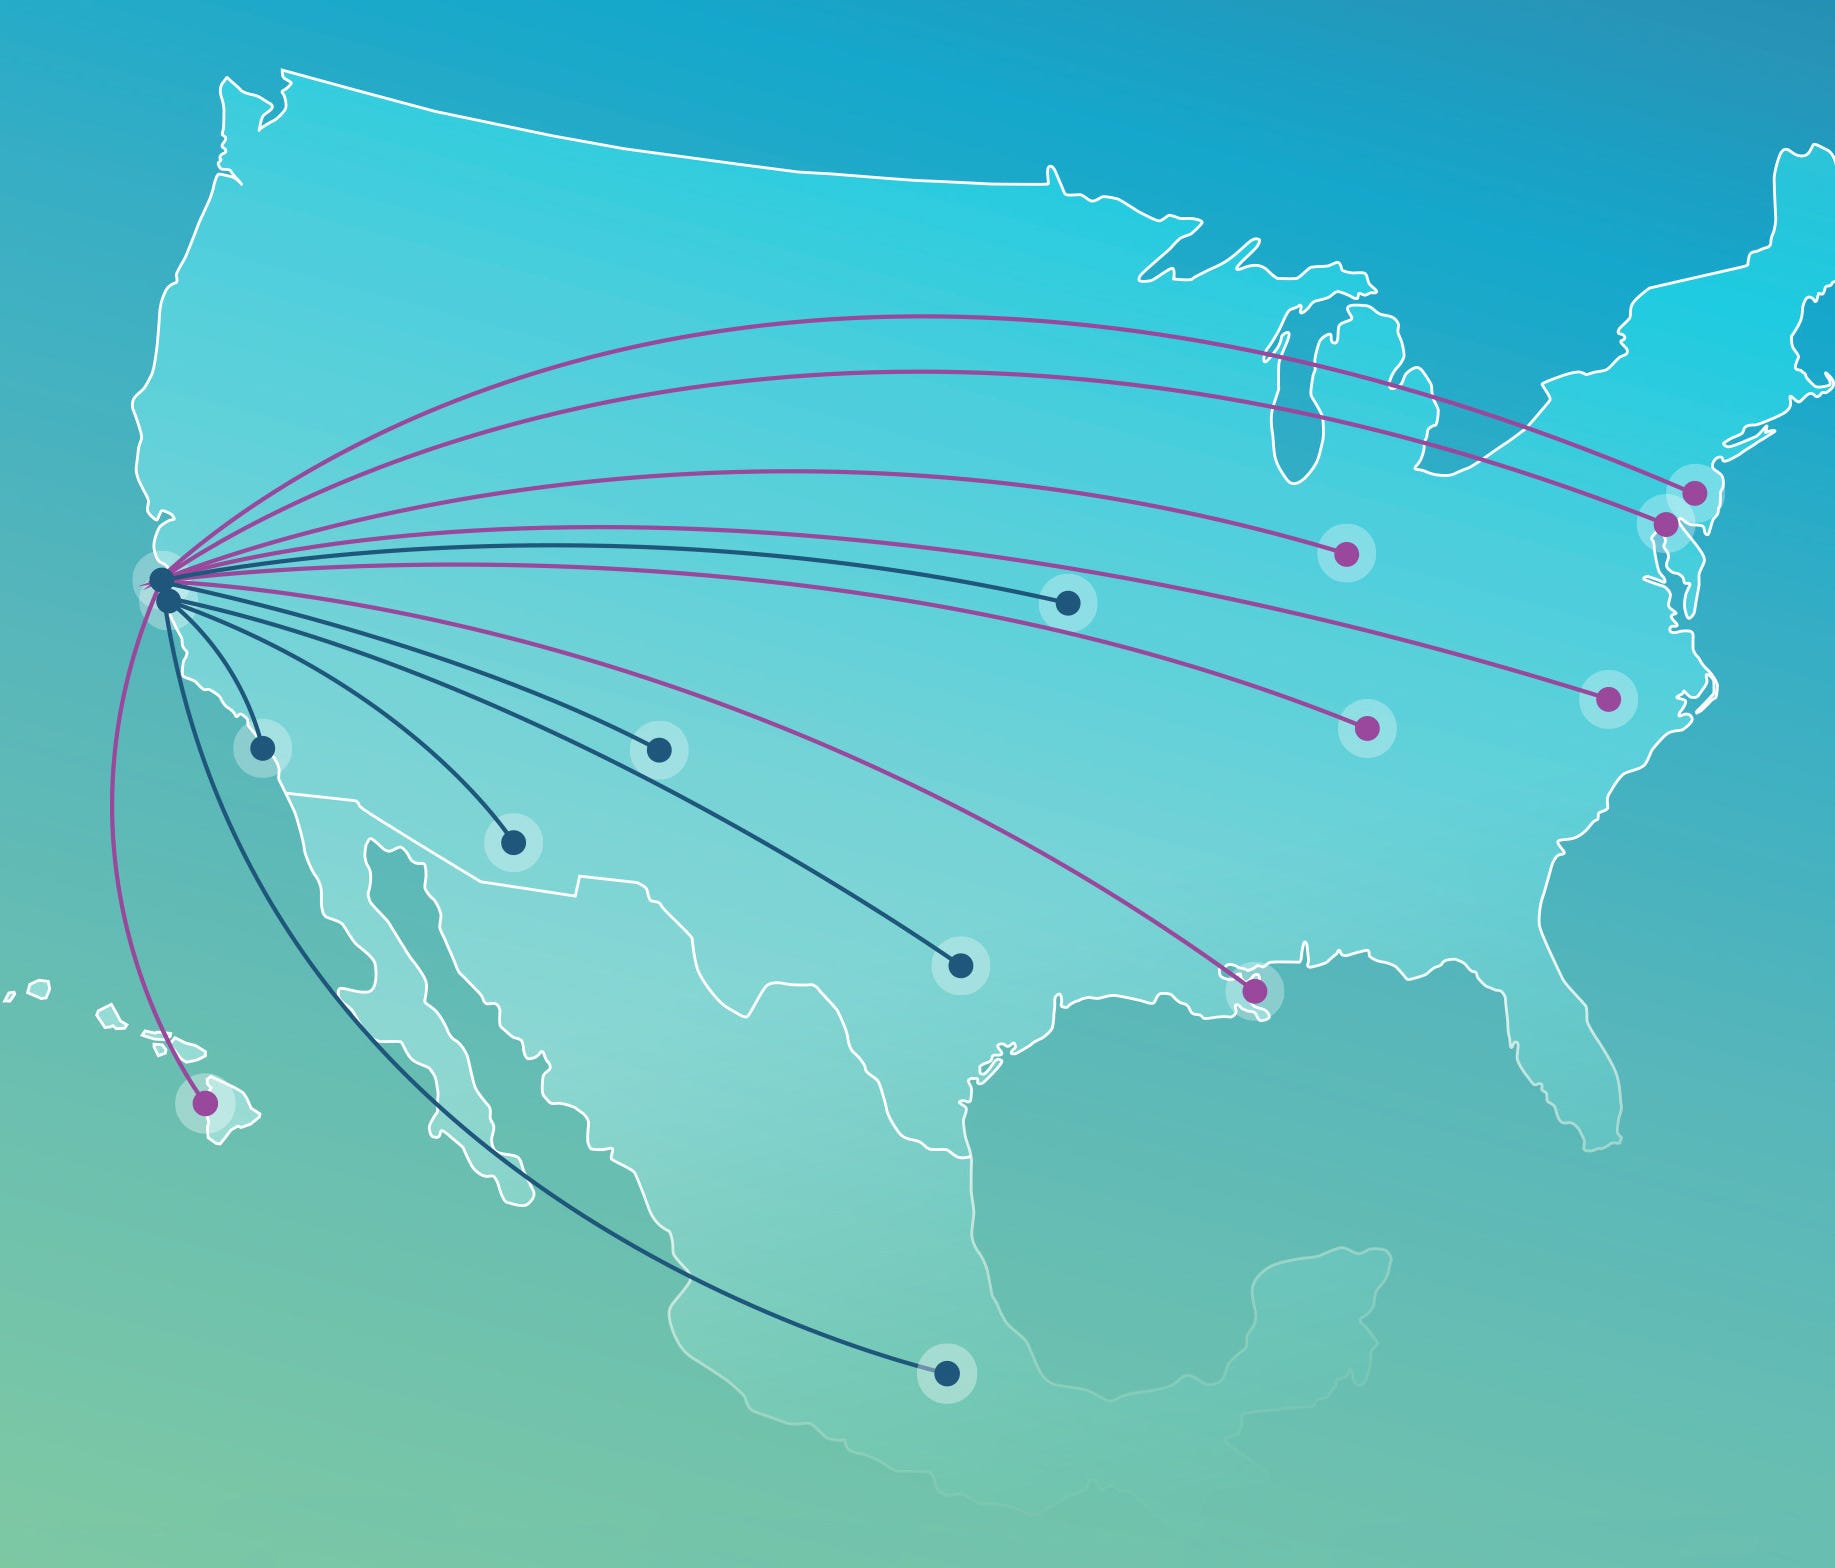 This image provided by Alaska Airlines shows new routes that it announced from the Bay Area of California on March 9, 2017.